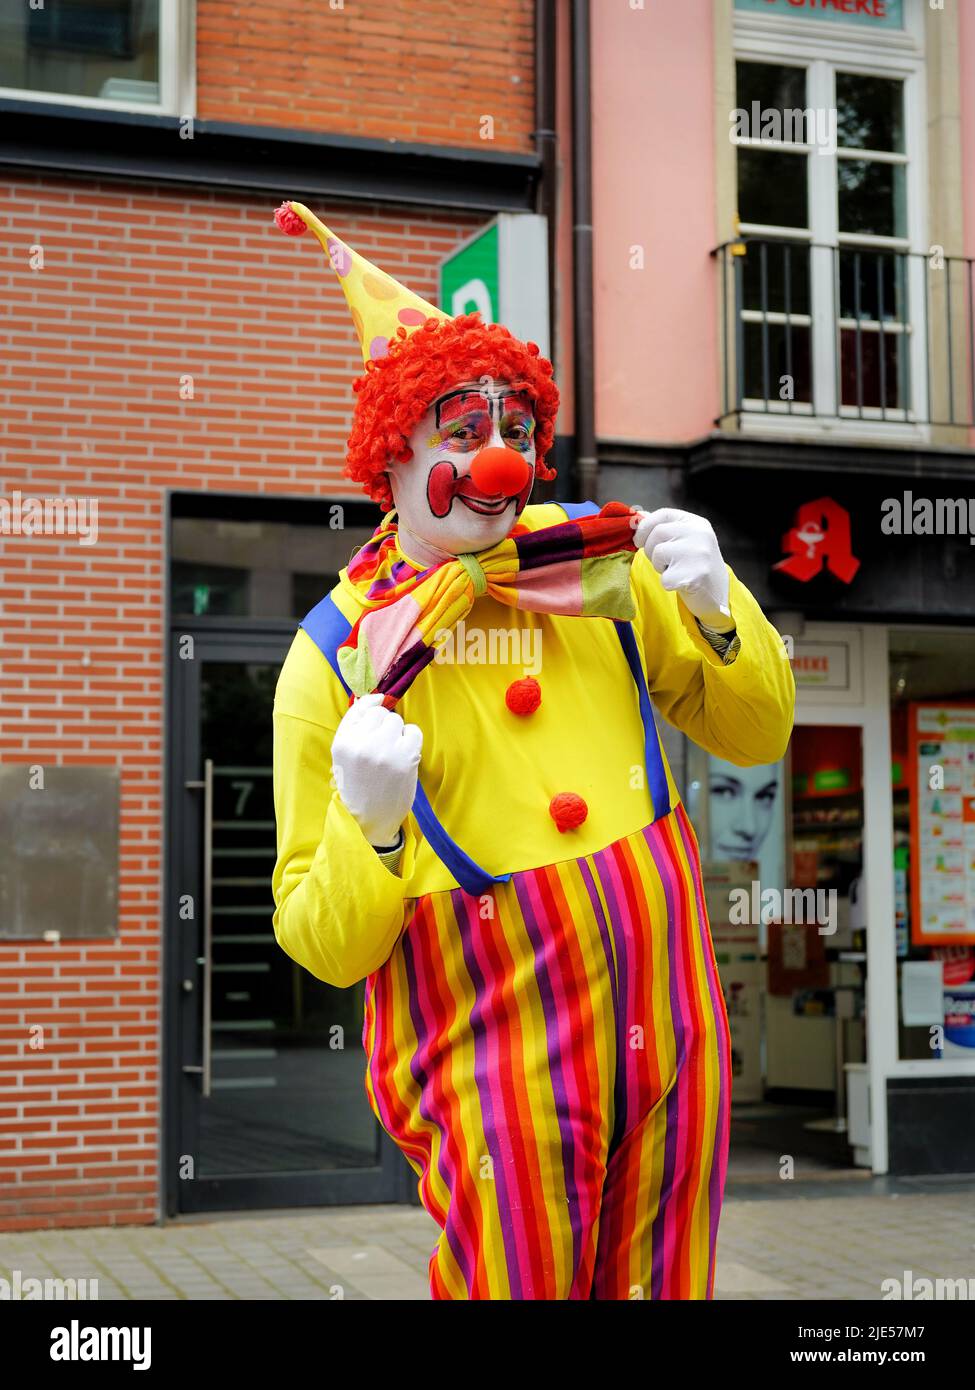 Man dressed up as a clown posing for a picture in the Old Town of Düsseldorf/Germany. Old Town is a popular tourist area. Stock Photo